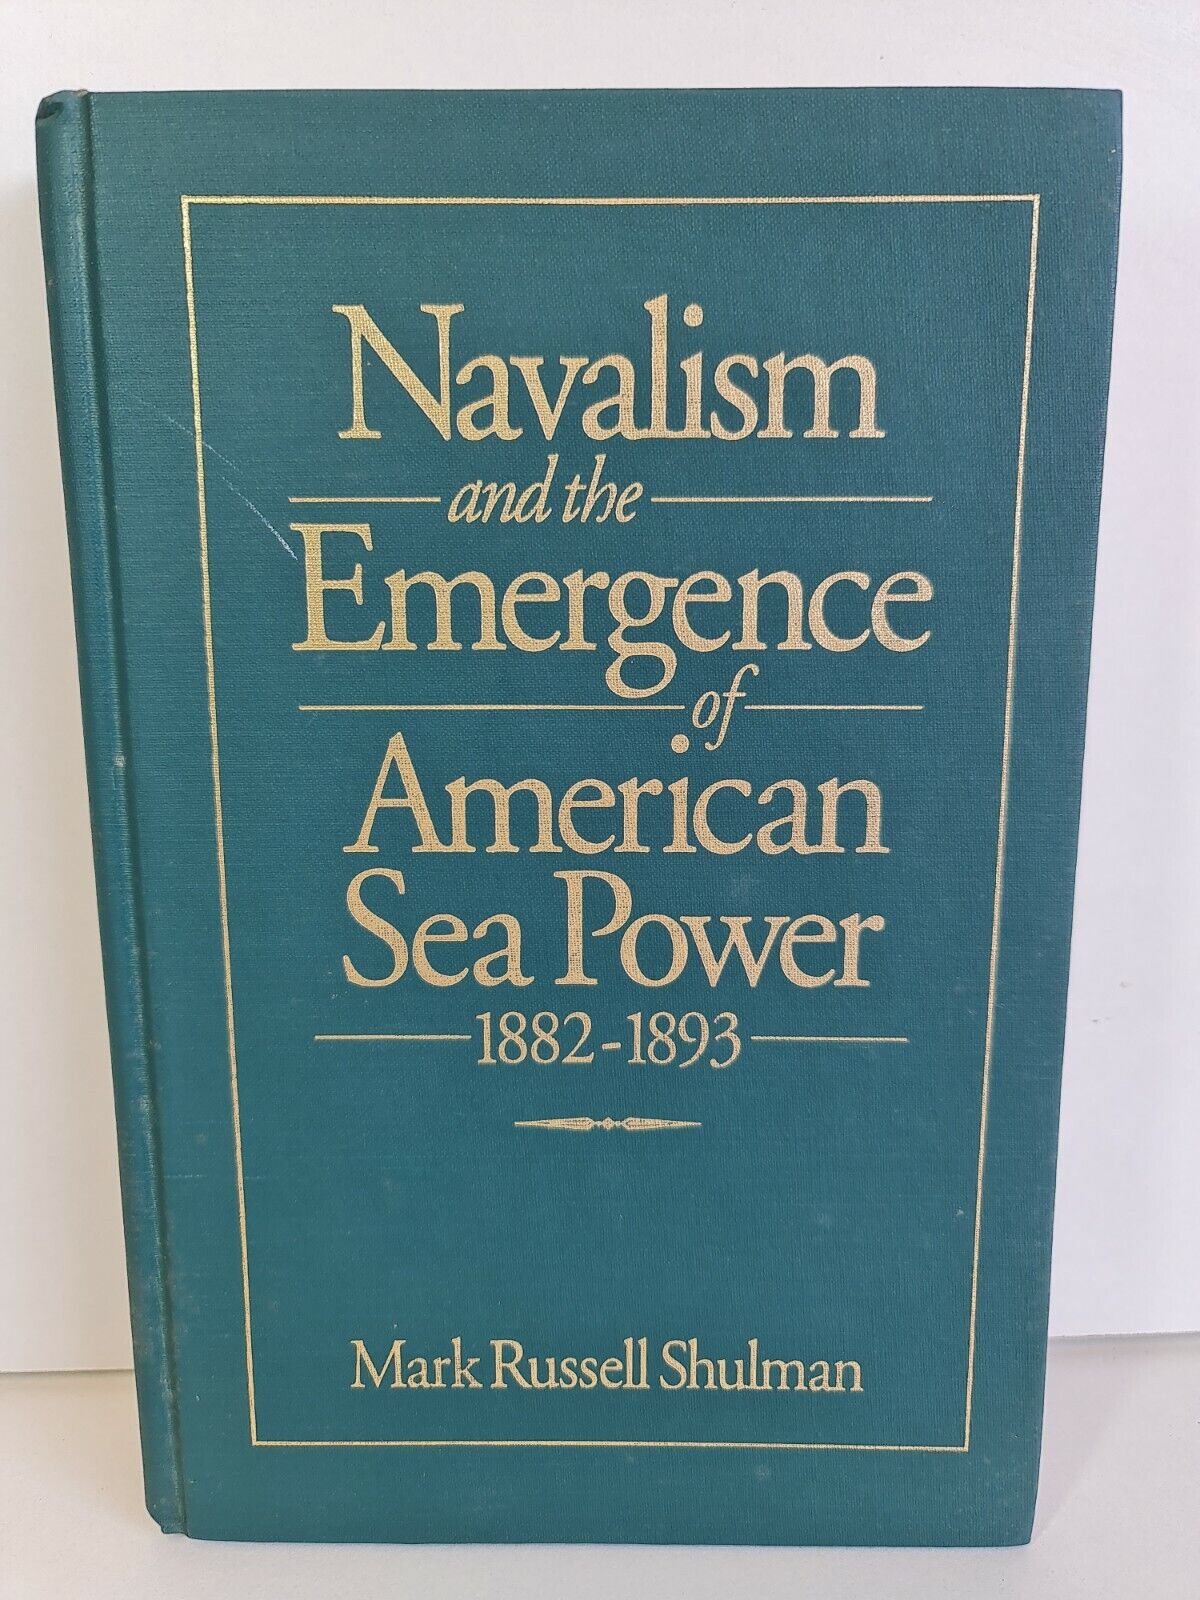 SIGNED Navalism & the Emergence of American Sea Power 1882-93 by Mark Shulman